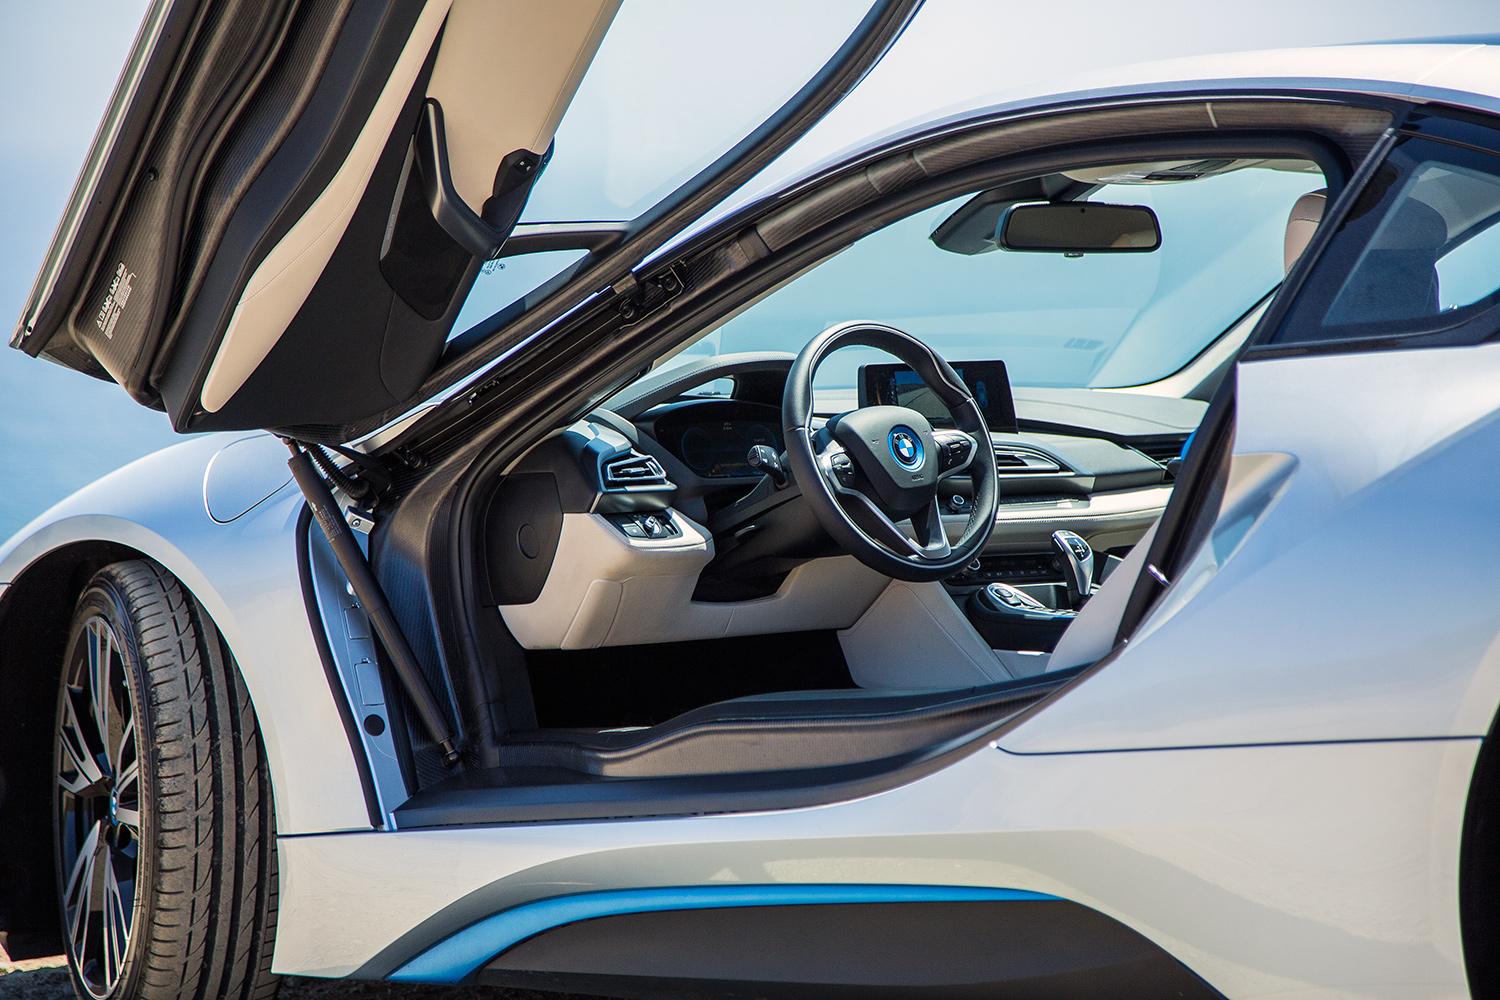 2015 BMW i8 Review - Supercar for Environmentalists